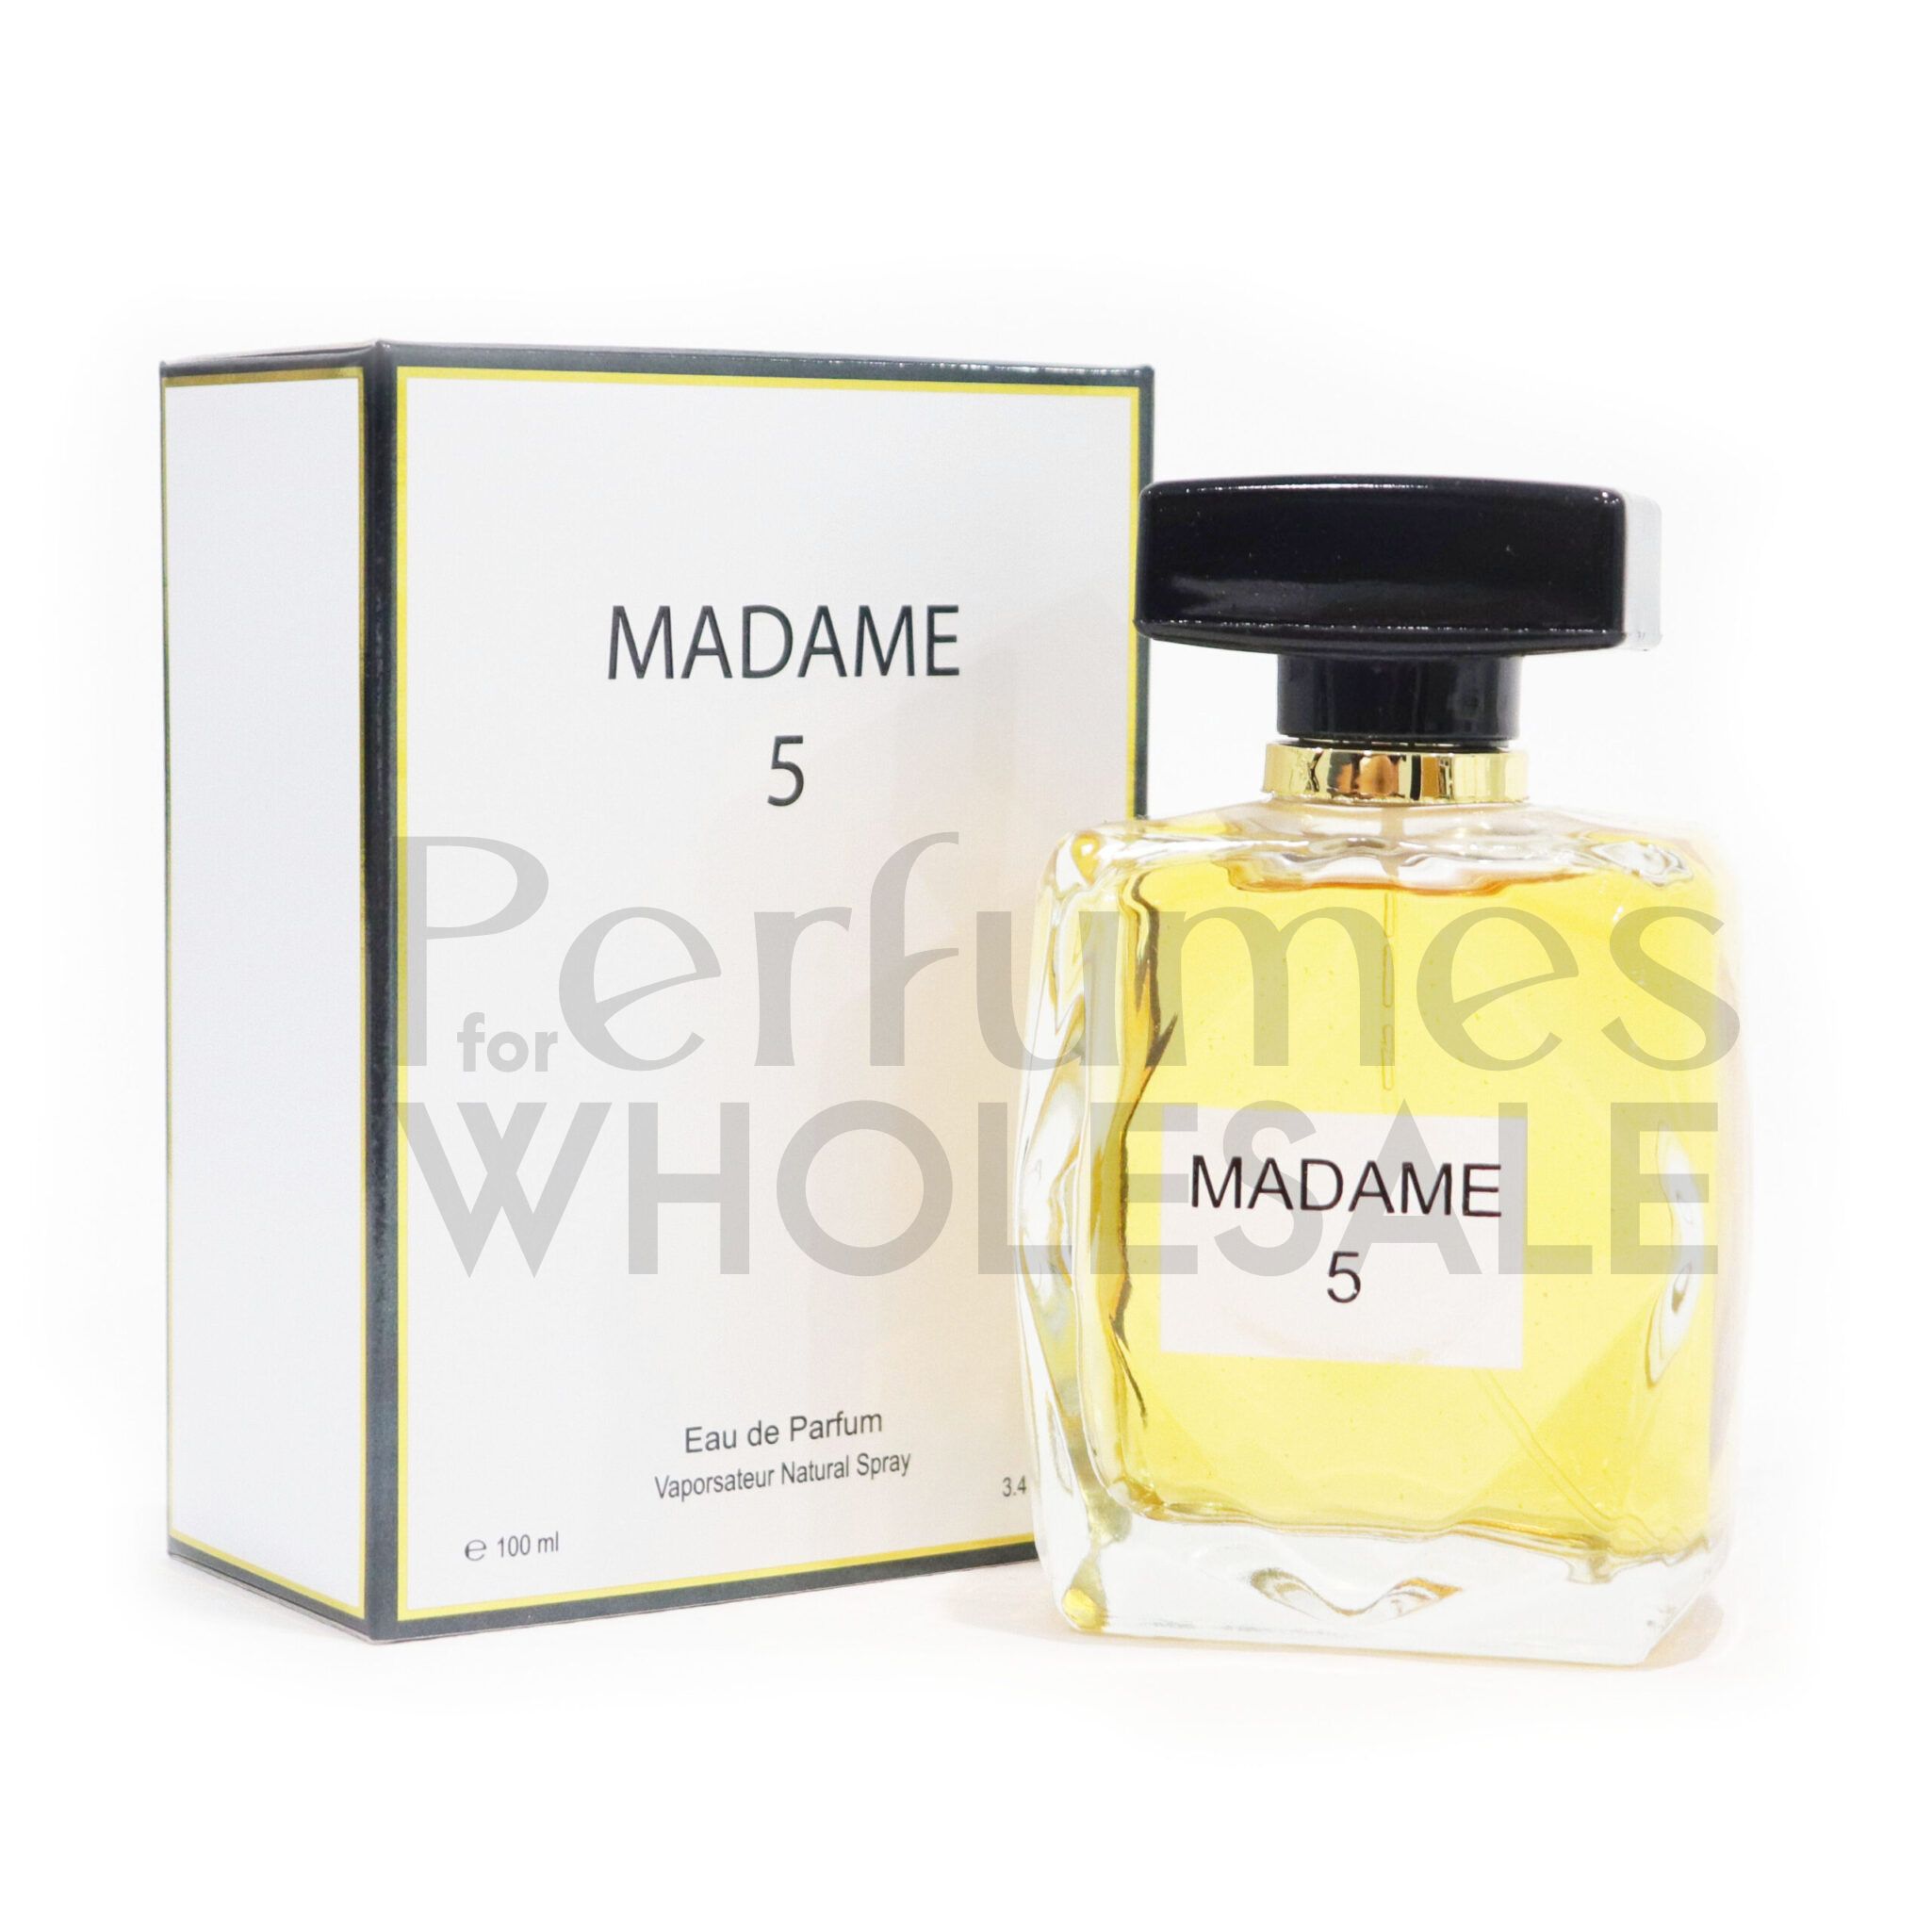 Perfumes for Wholesale – Wholesale Inspired Assorted Perfume Box